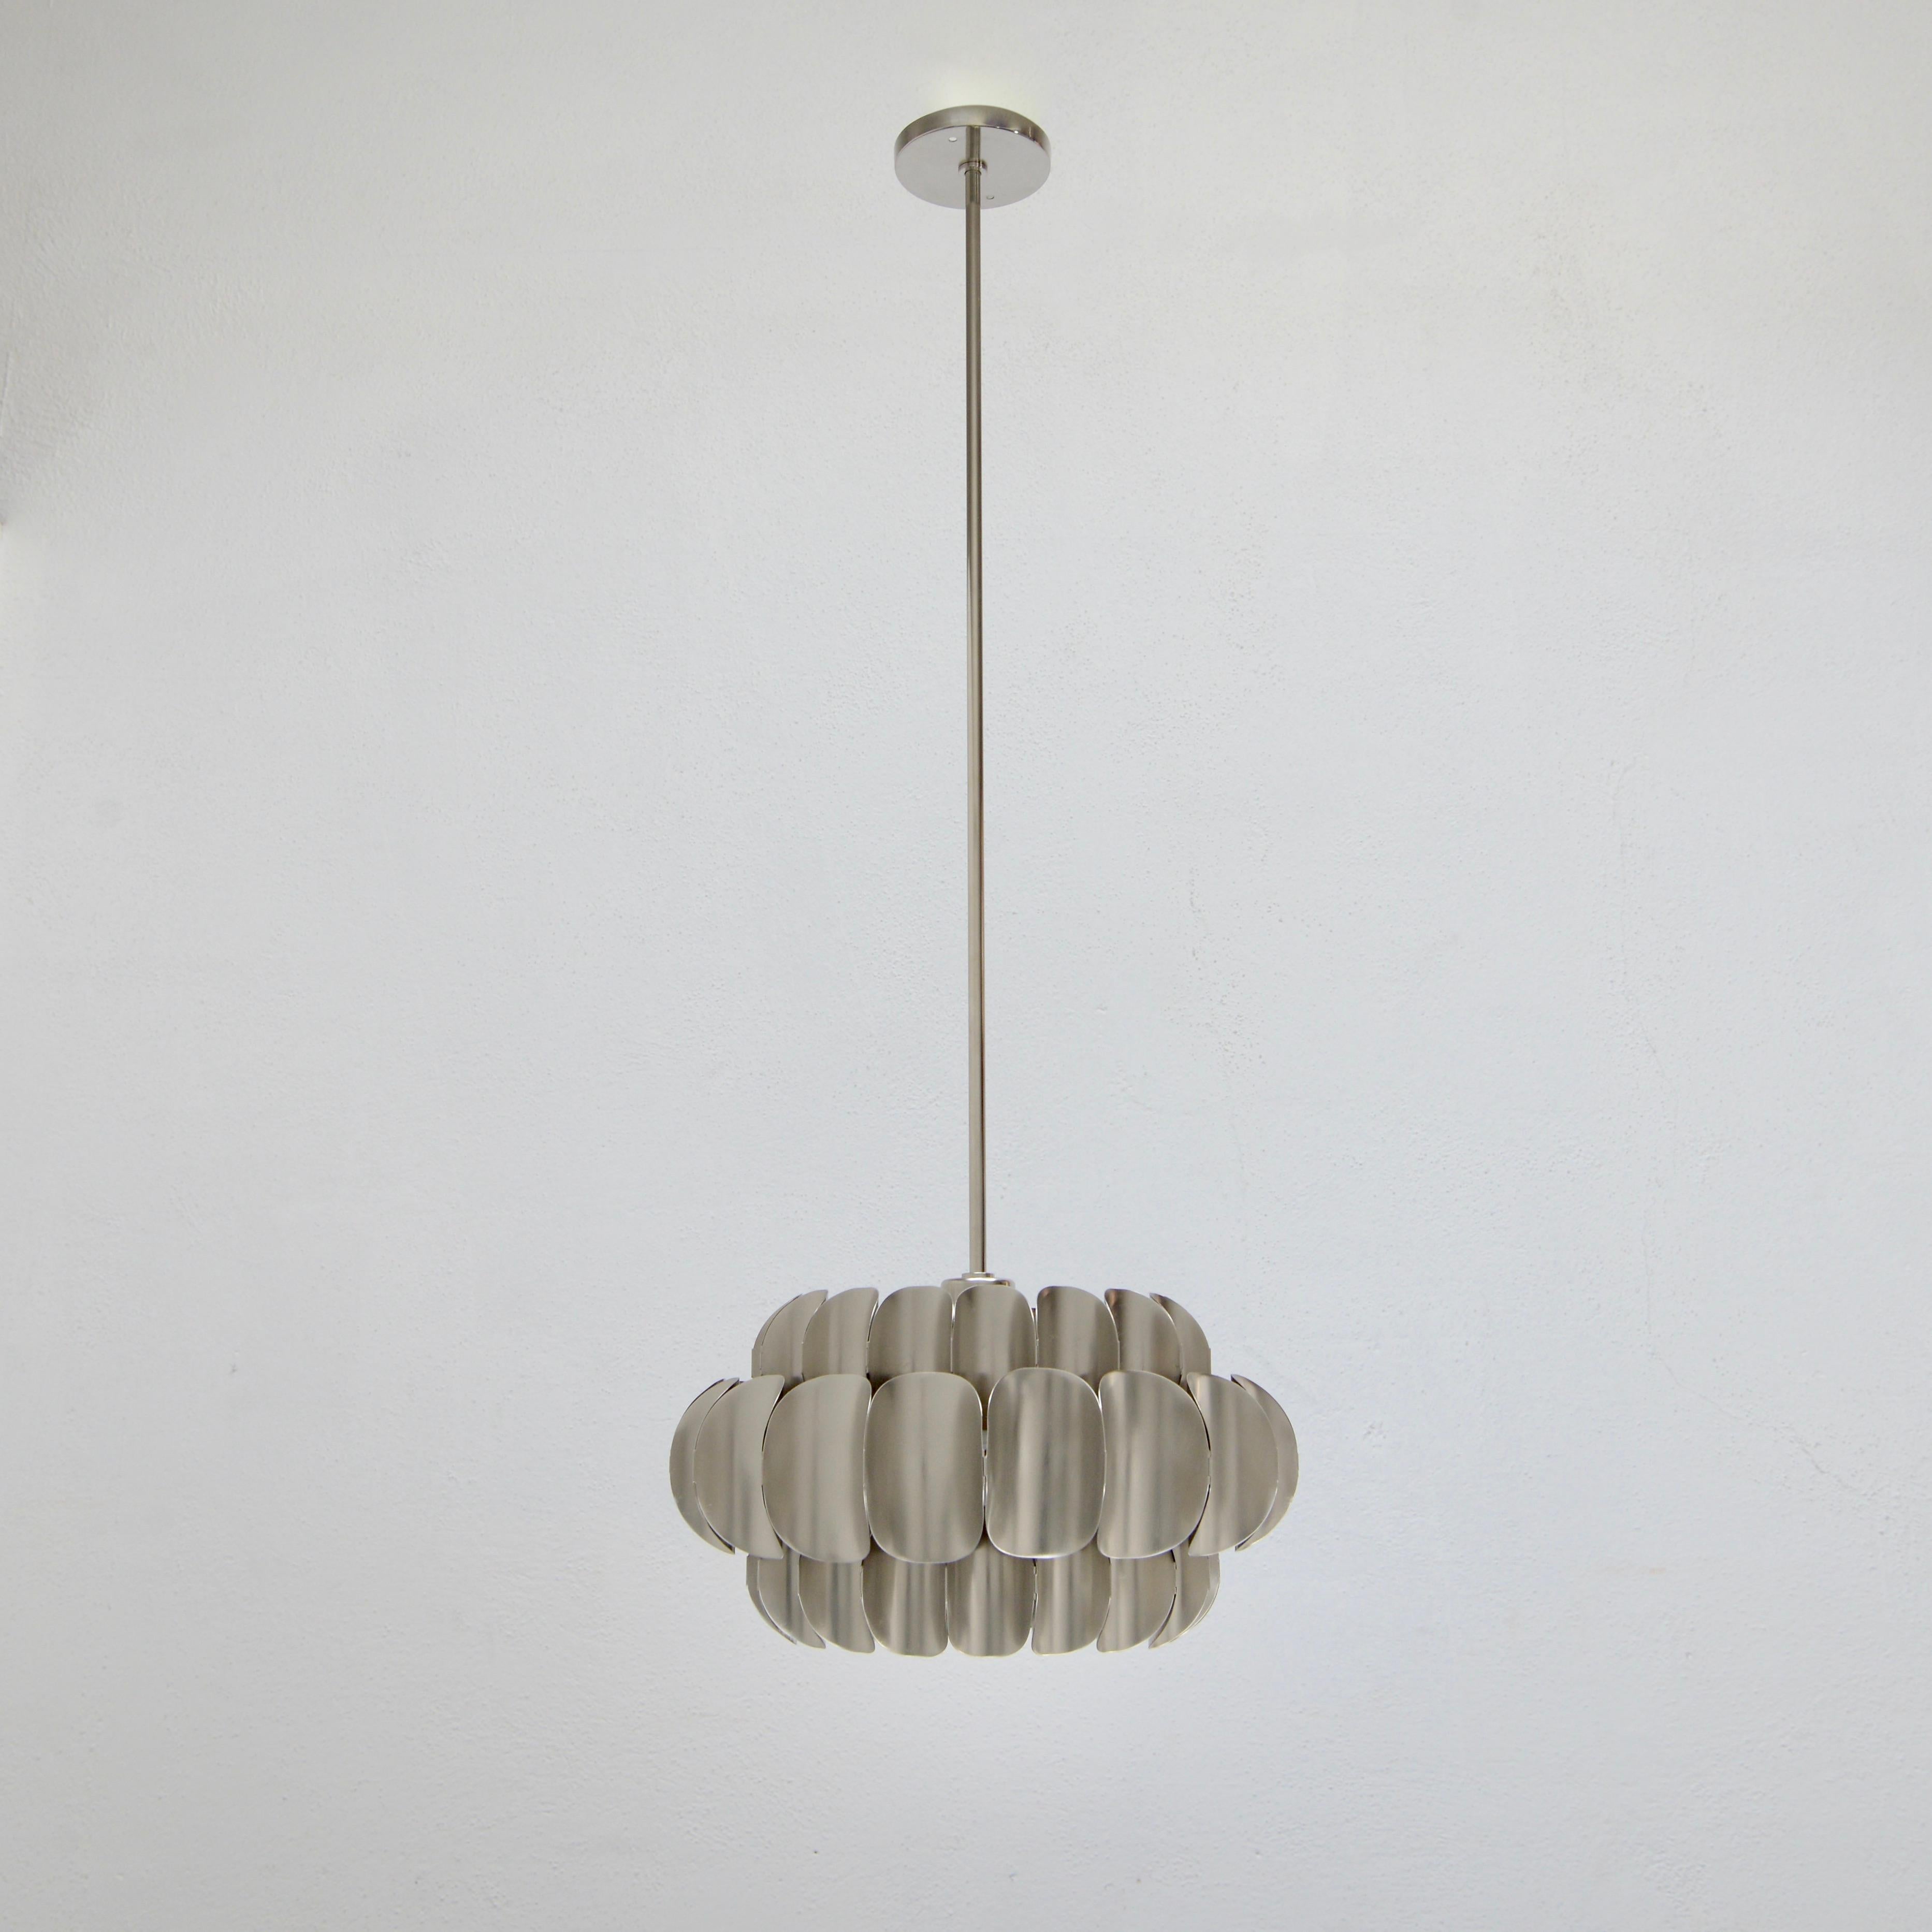 Beautiful nickel-plated steel pendant with acrylic diffuser by Hans Agne Jakobsson from 1950s Sweden. Partially restored, with original nickel plated steel finish. Rewired for the US with a single E26 medium based socket.. Lightbulb included with